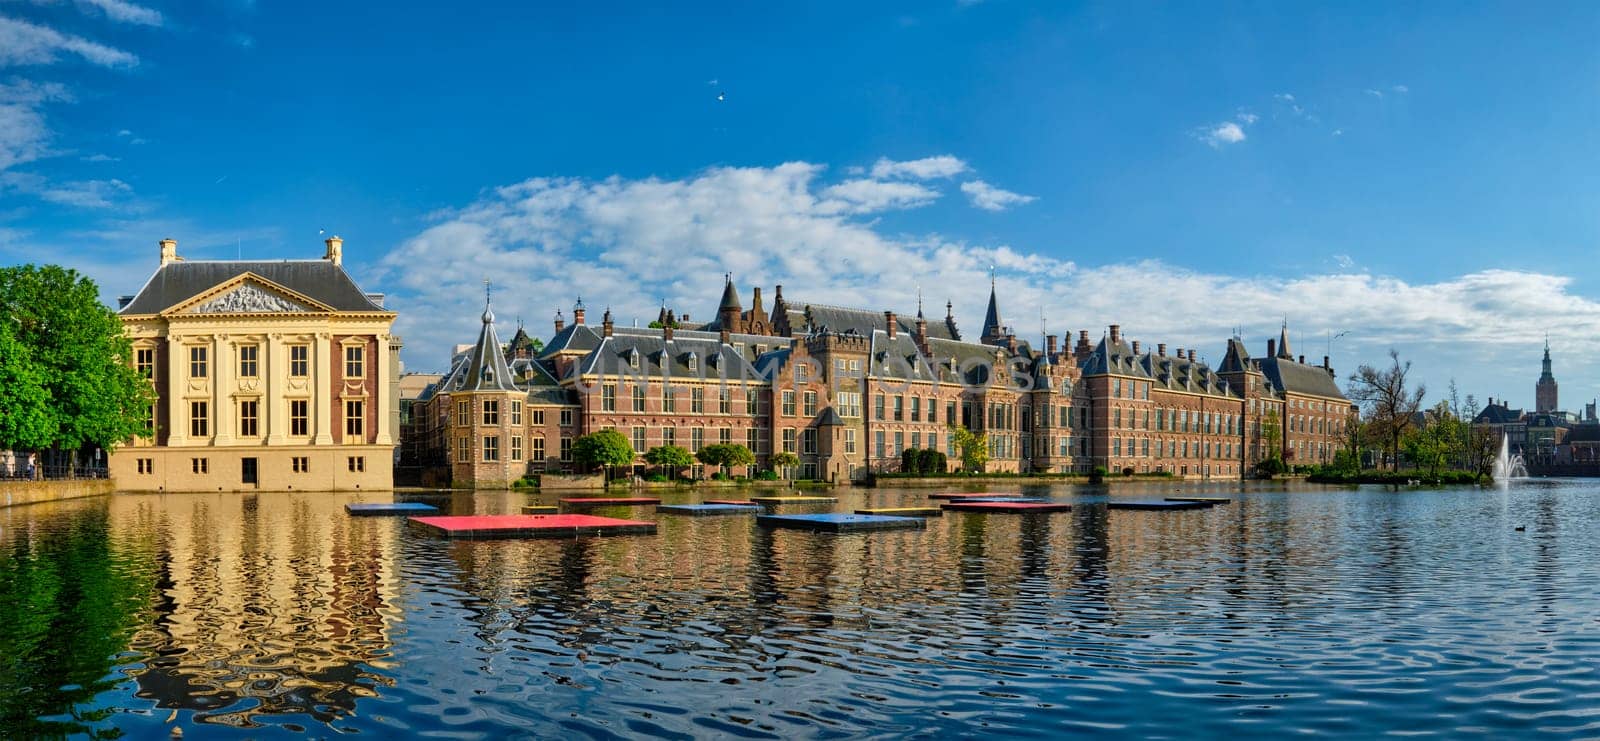 Panorama of the Binnenhof House of Parliament and Mauritshuis museum and the Hofvijver lake. The Hague, Netherlands